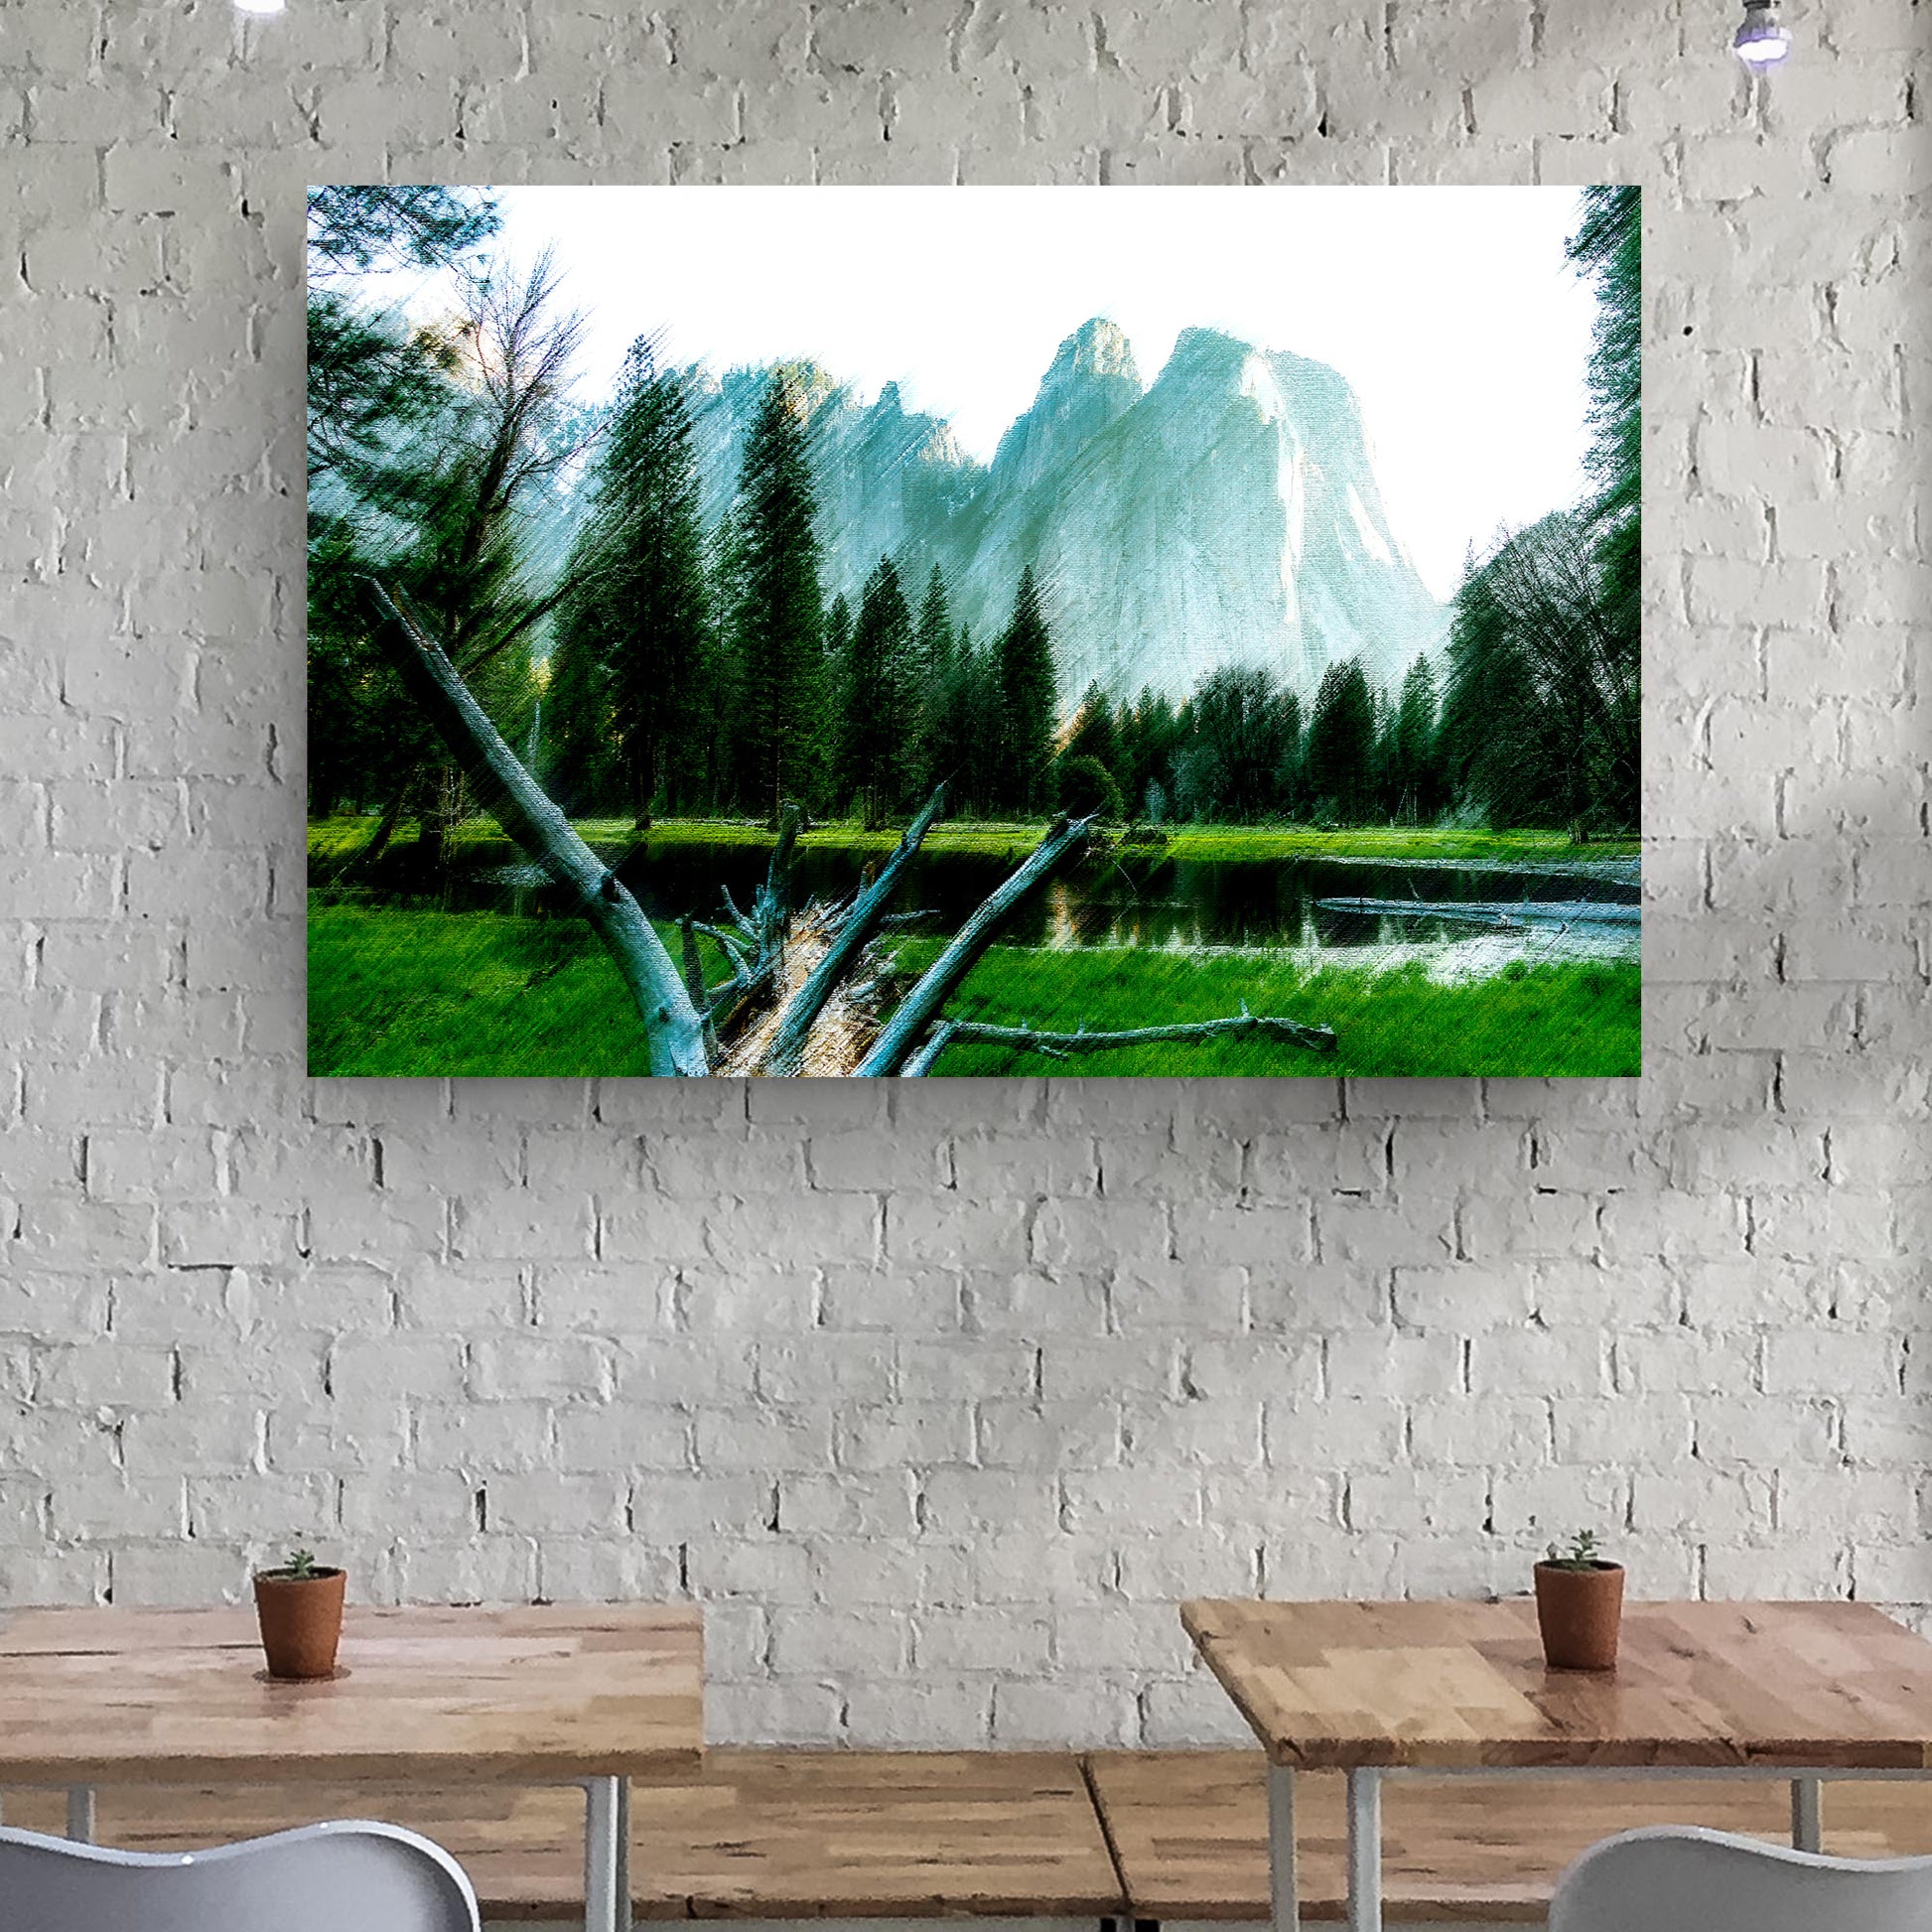 Misty Forest Lake Canvas Wall Art - Image by Tailored Canvases